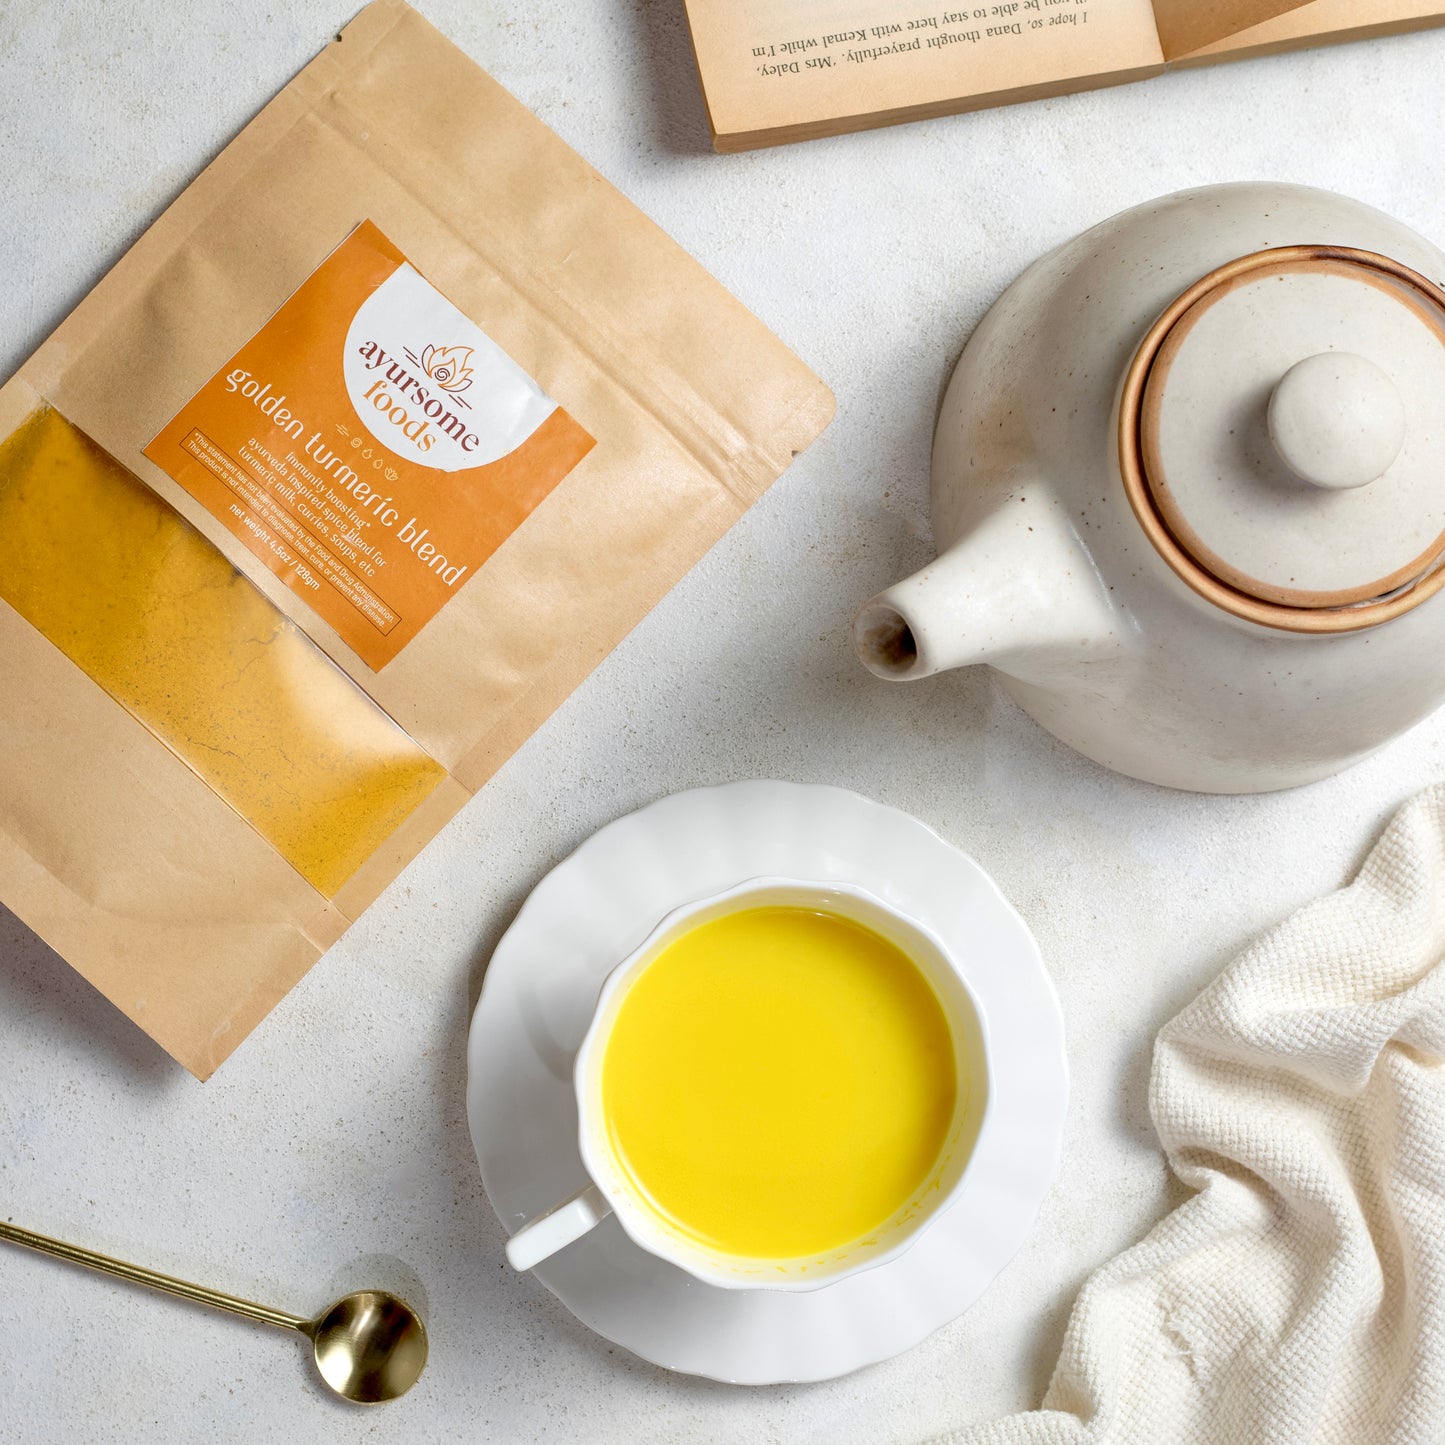 On a white background, there is pack of ayurveda turmeric spice blend, a cup of turmeric latte in a white cup, a golden color spoon, a white kettle, a white dinner napkin and a book. The golden turmeric spice blend is packed in a brown Kraft bag and is labelled in orange by Ayursome Foods.